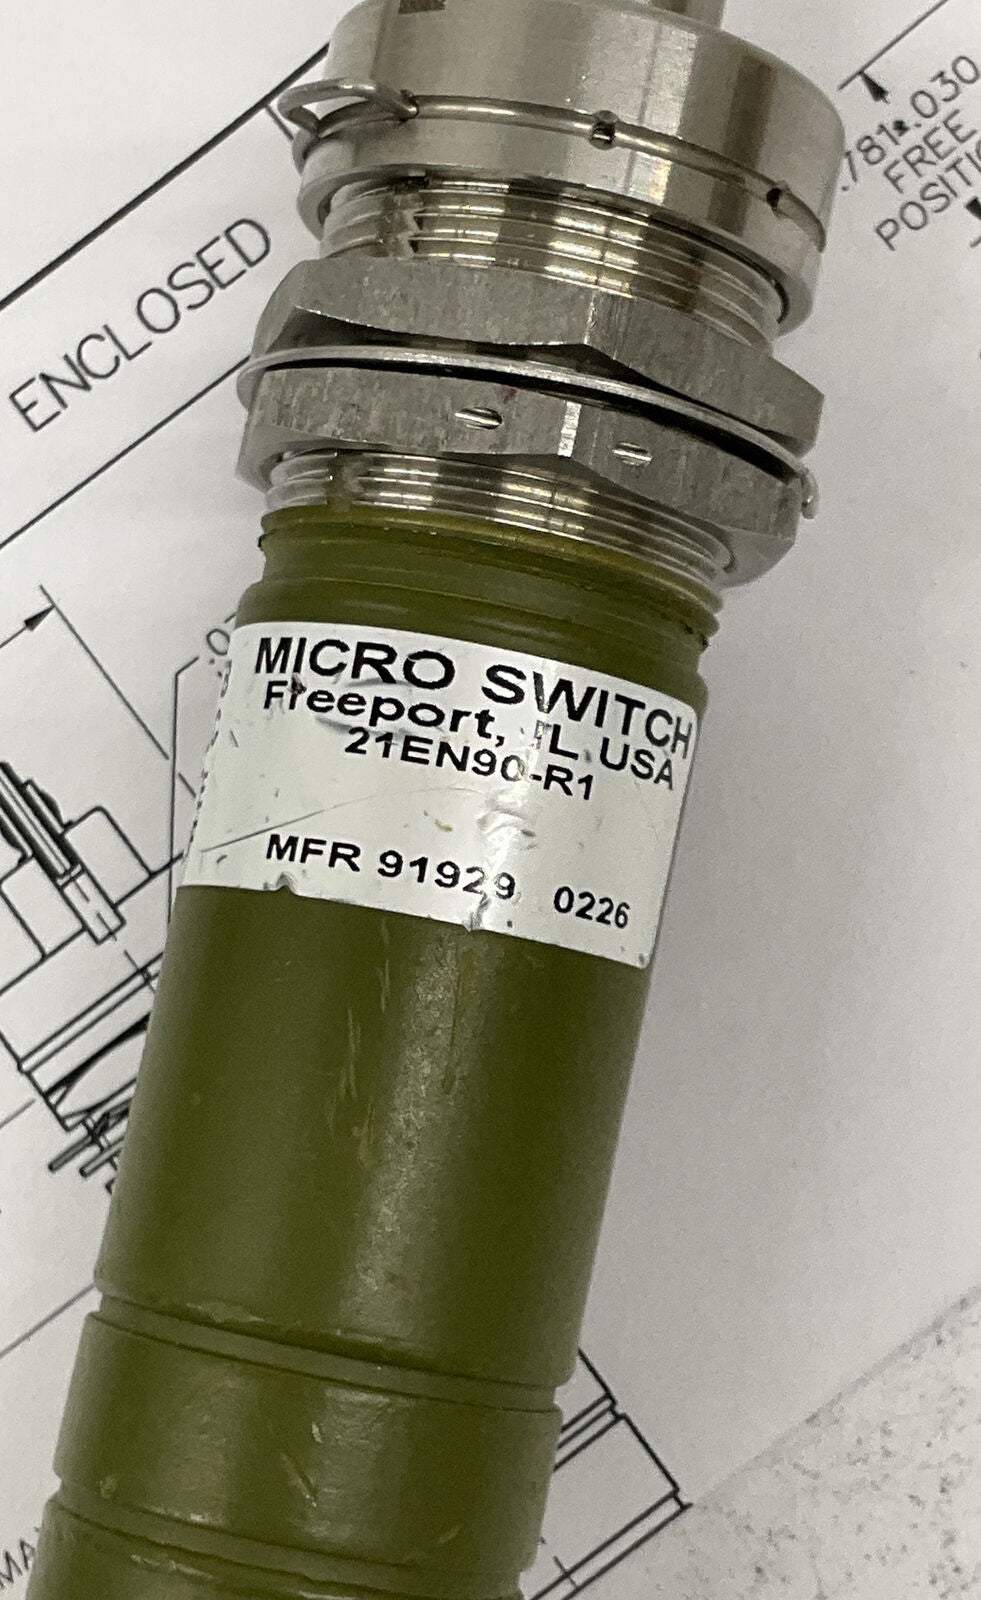 Micro-Switch / Honeywell 21EN90-R1 New Roller Limit Switch DPDT 2NO-2NC (YE156)